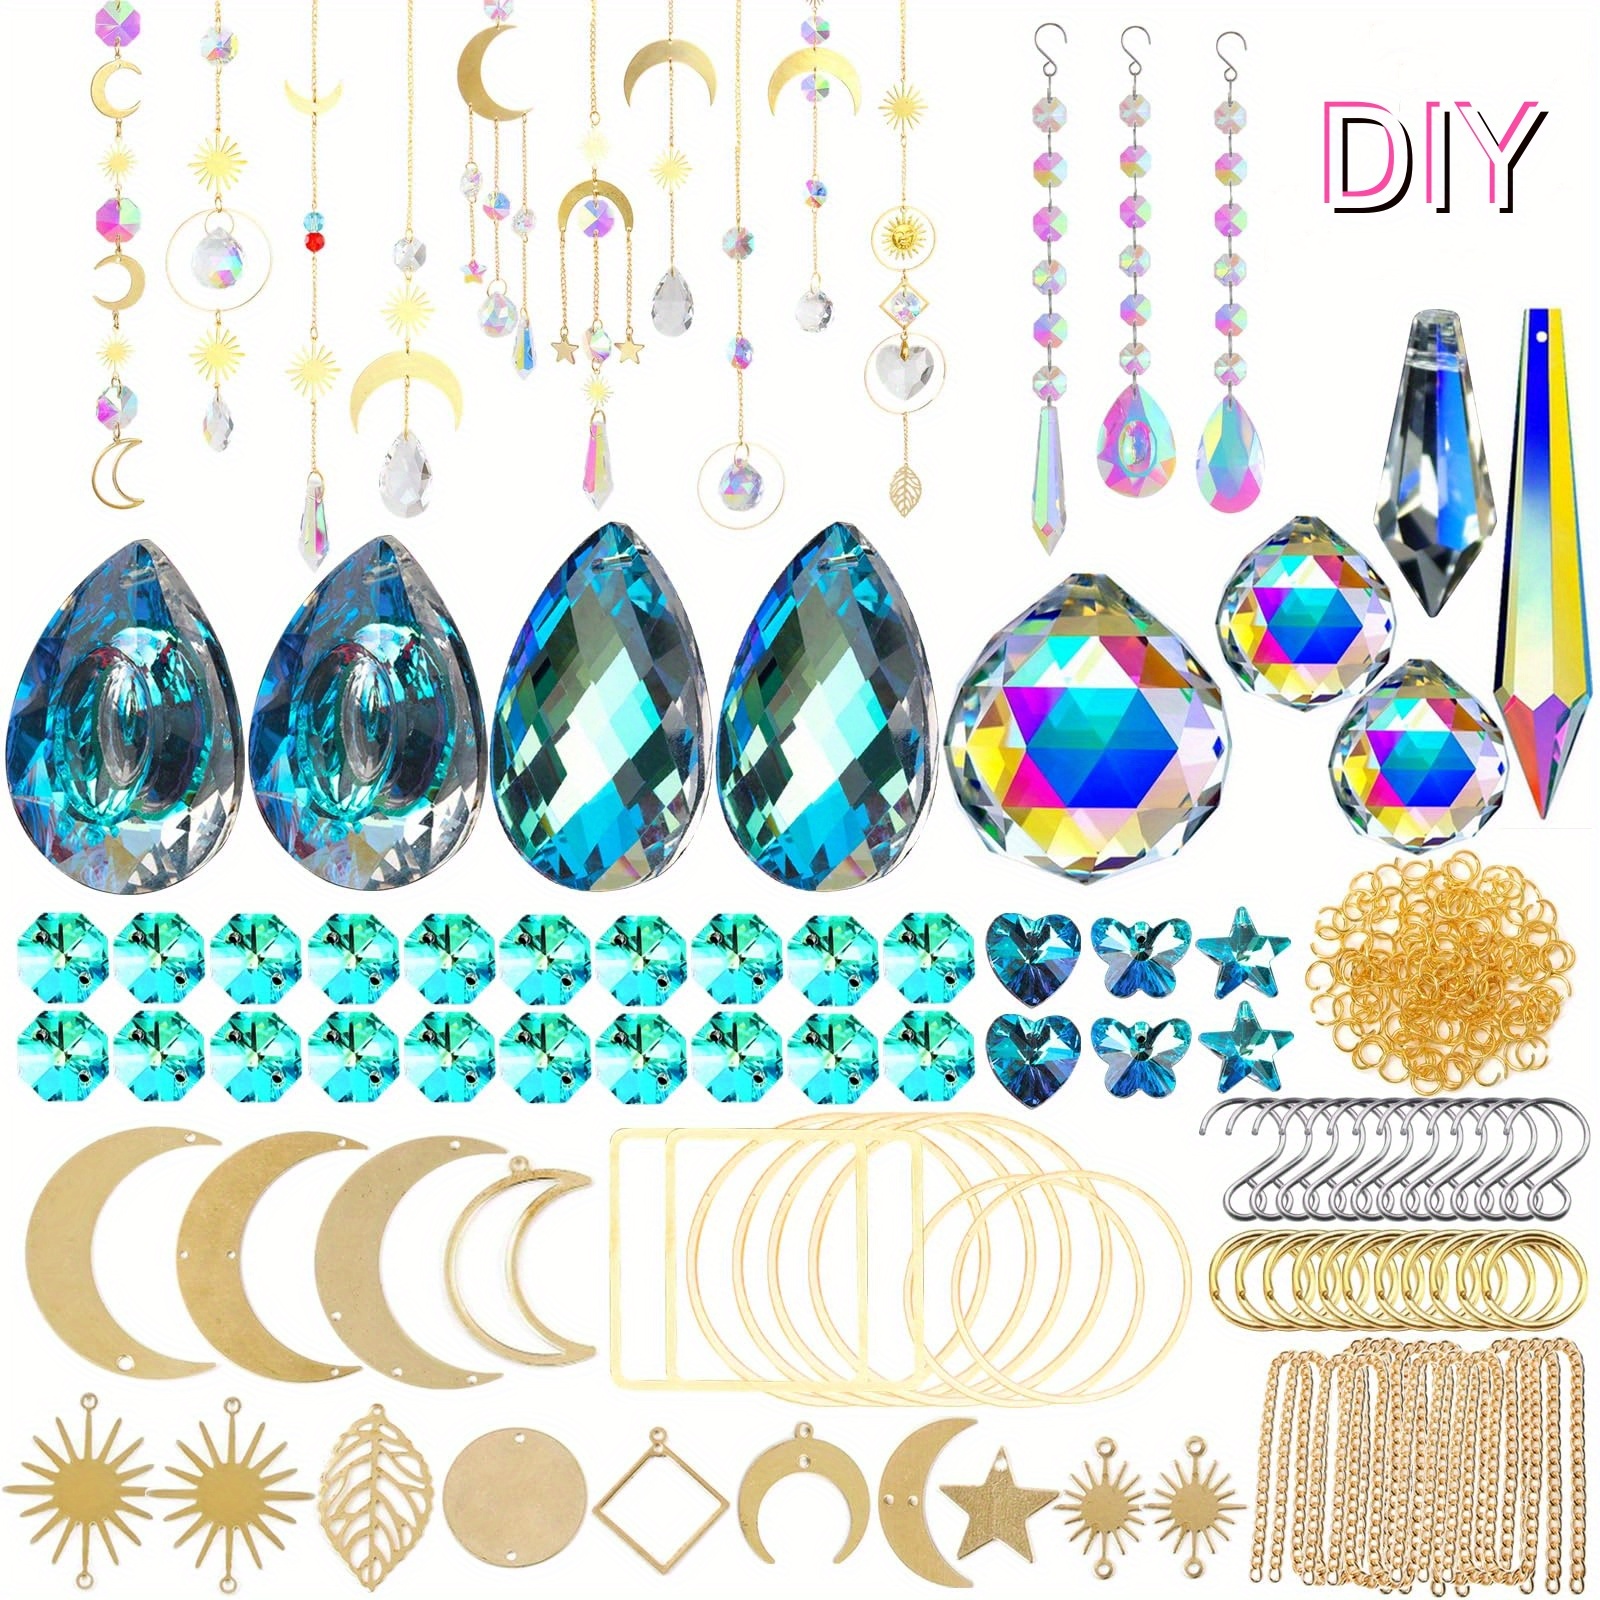 

370pcs Diy Sun Catcher Kit, Golden & Silvery Crystal Sun Catchers Supplies With Colorful Glass Prisms, Indoor & Outdoor Garden Christmas Decor, Rainbow-making Pendant Chains For Window Hanging